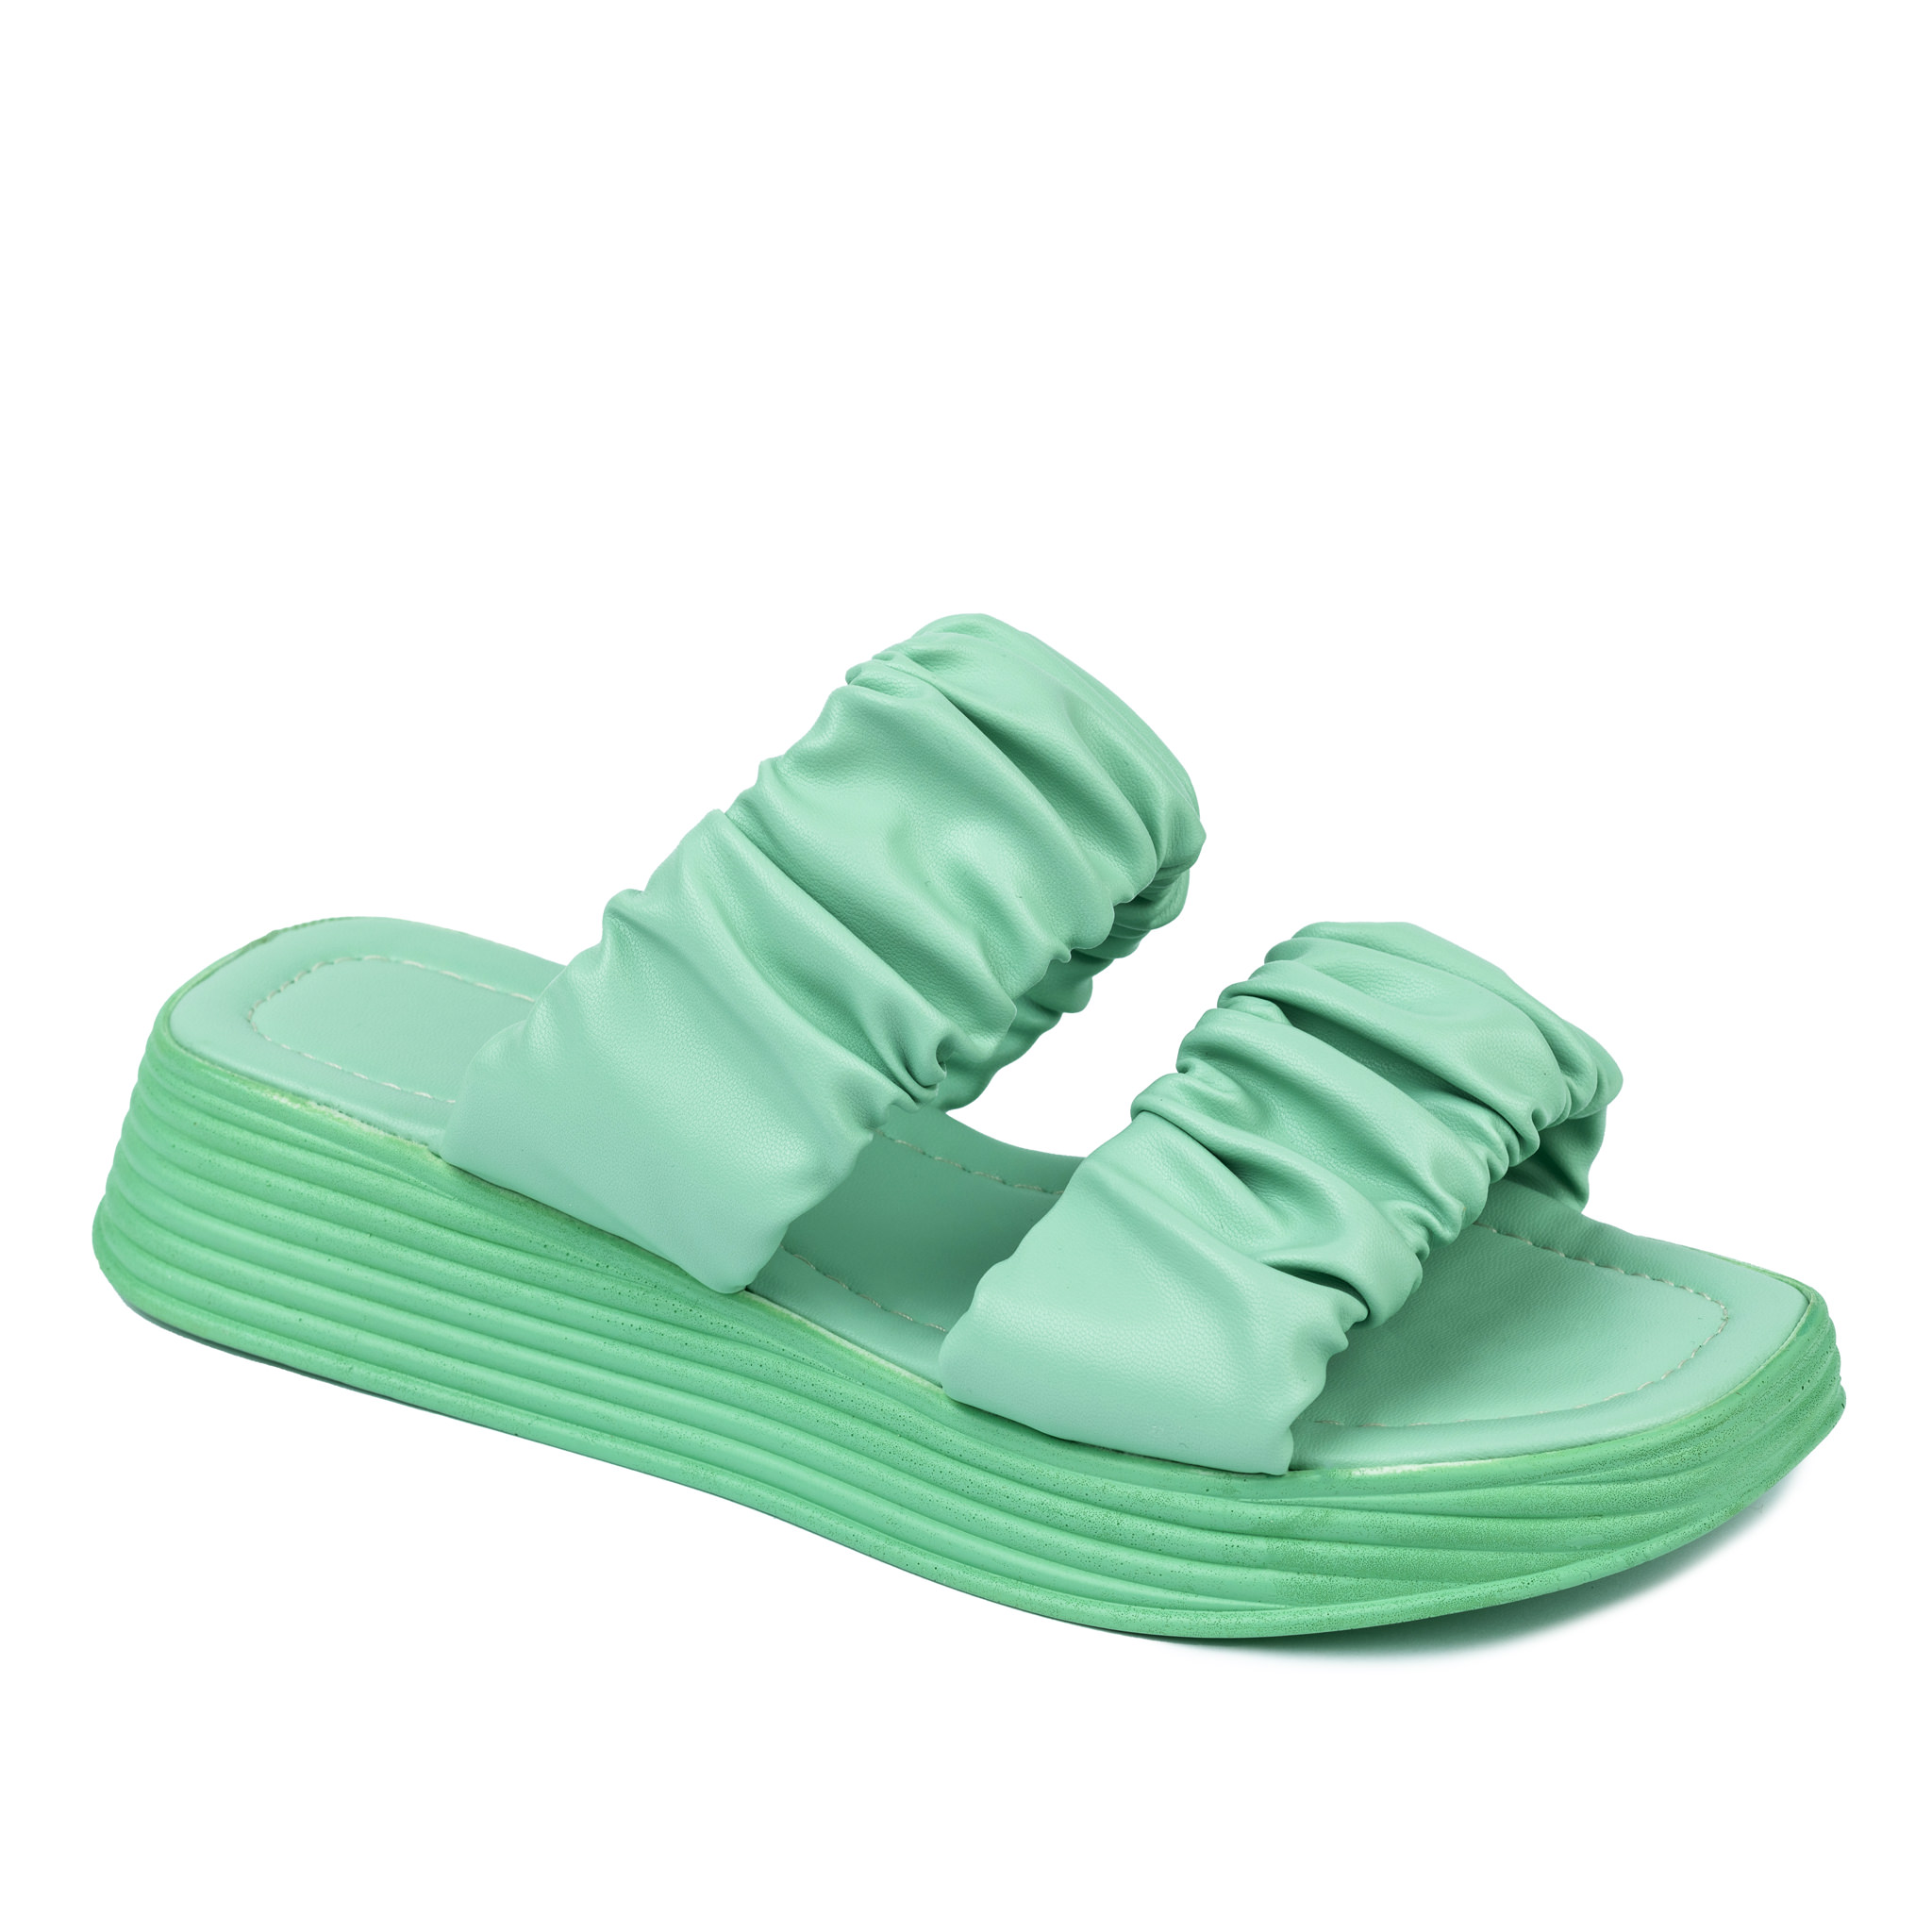 Women Slippers and Mules A430 - MINT